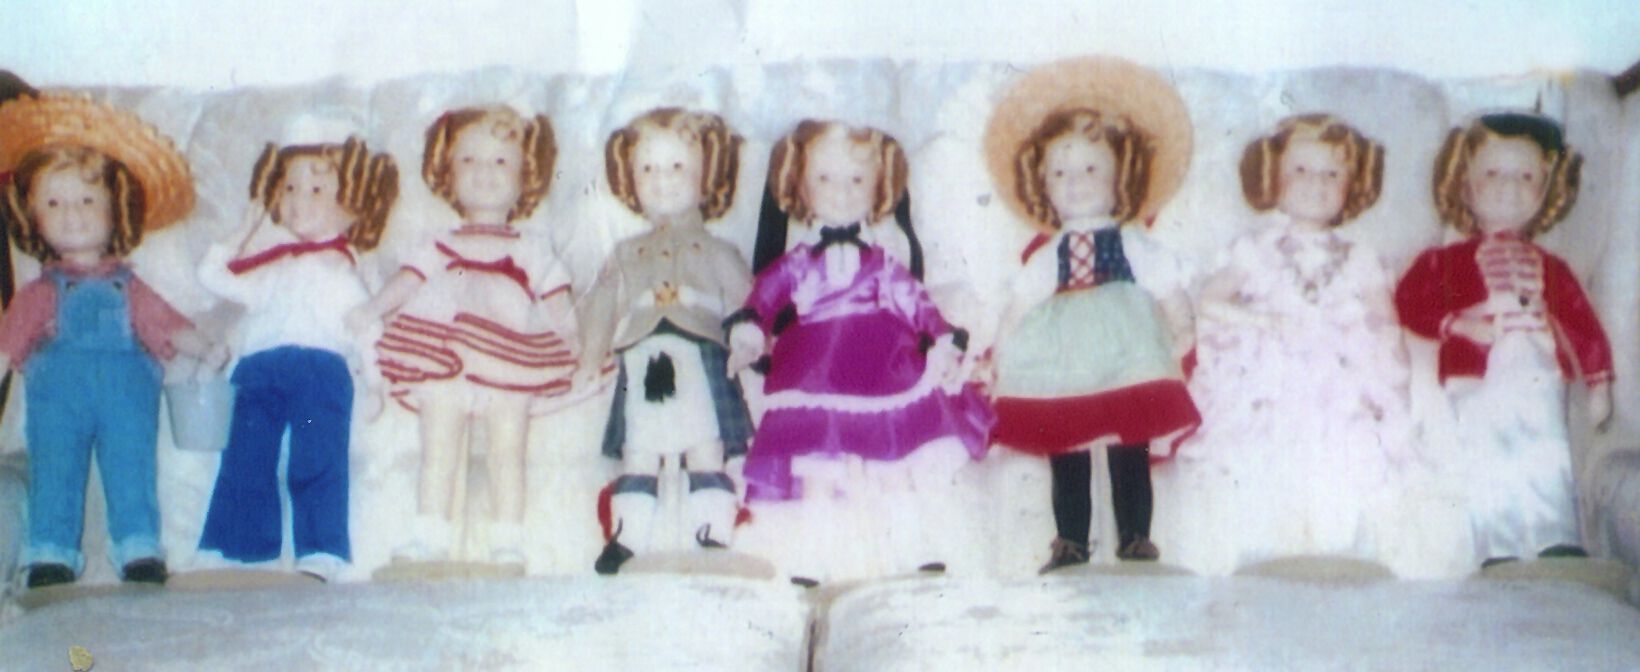 Sifton: Bonnie McCourtney's beloved Shirley Temple doll collection has been distributed to her great-granddaughters, but here's a reunion photo, each representing a movie: &quot;Rebecca of Sunnybrook Farm,&quot; from left, &quot;Captain January,&quot; &quot;Stand Up and Cheer,&quot; &quot;Wee Willie Winkie,&quot; &quot;The Little Colonel,&quot; &quot;Heidi,&quot; &quot;Poor Little Rich Girl&quot; and &quot;The Littlest Rebel.&quot;